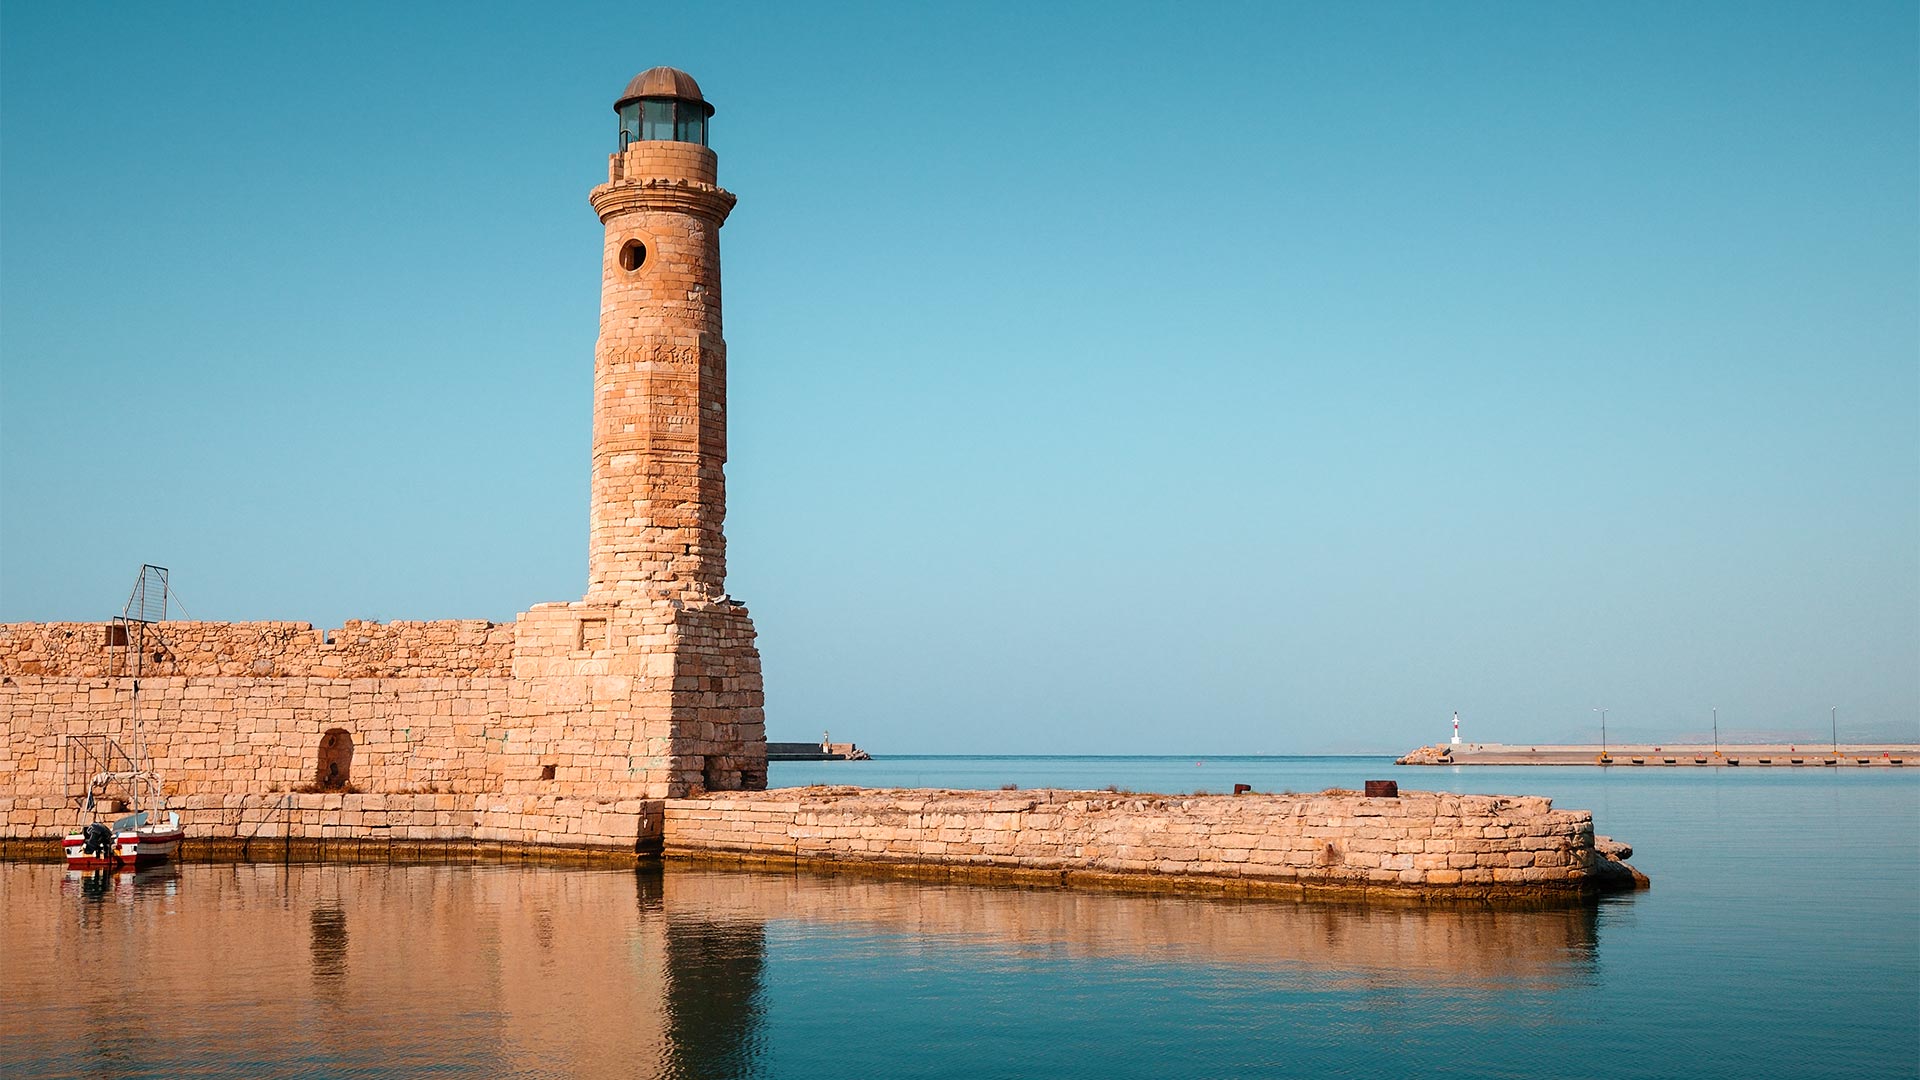 The old Venetian lighthouse in Rethymno